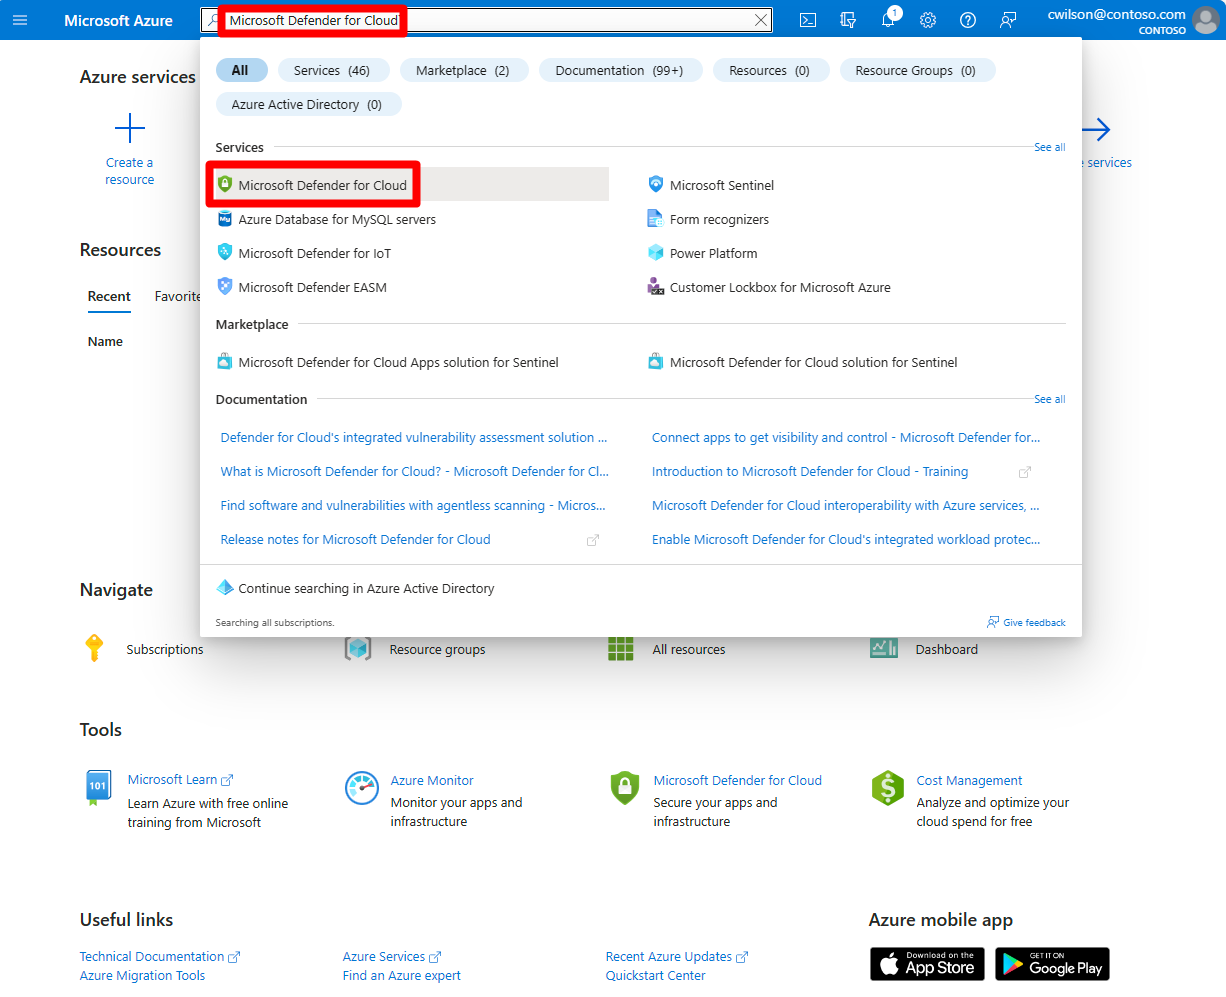 Screenshot of the Azure portal with Microsoft Defender for Cloud selected.